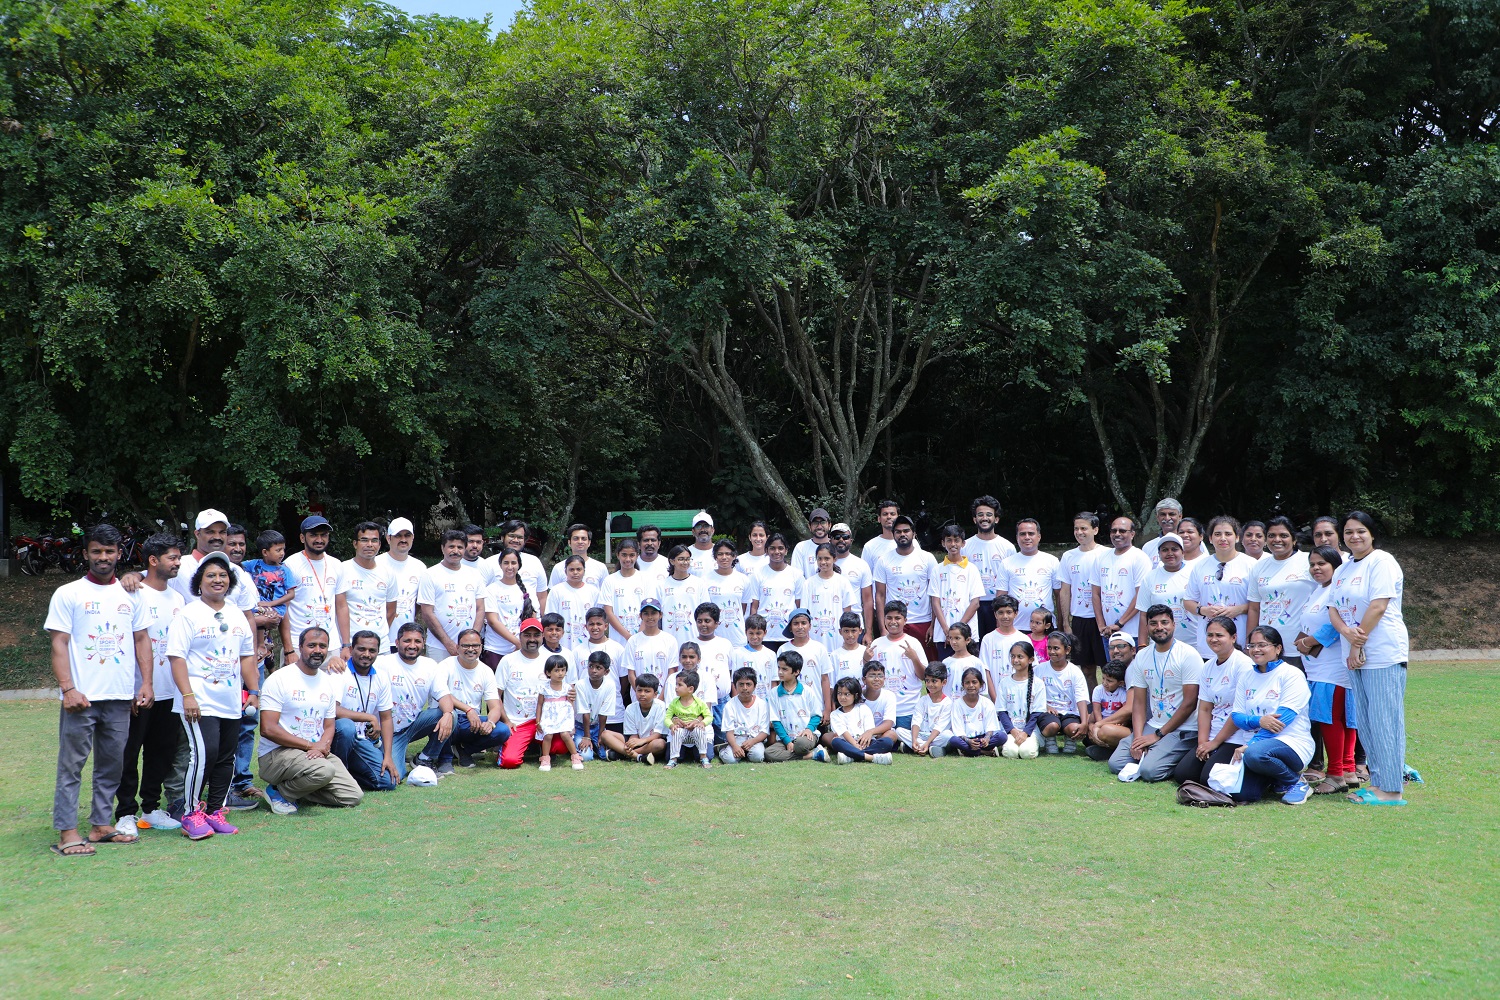 A host of sports activities were conducted by the Staff Recreation Committee (SRC) and the CAO’s Office at IIM Bangalore to mark National Sports Week 2023. Students, staff and members of the IIMB community participated in the events that commenced on 21st August and culminated on 29th August 2023.